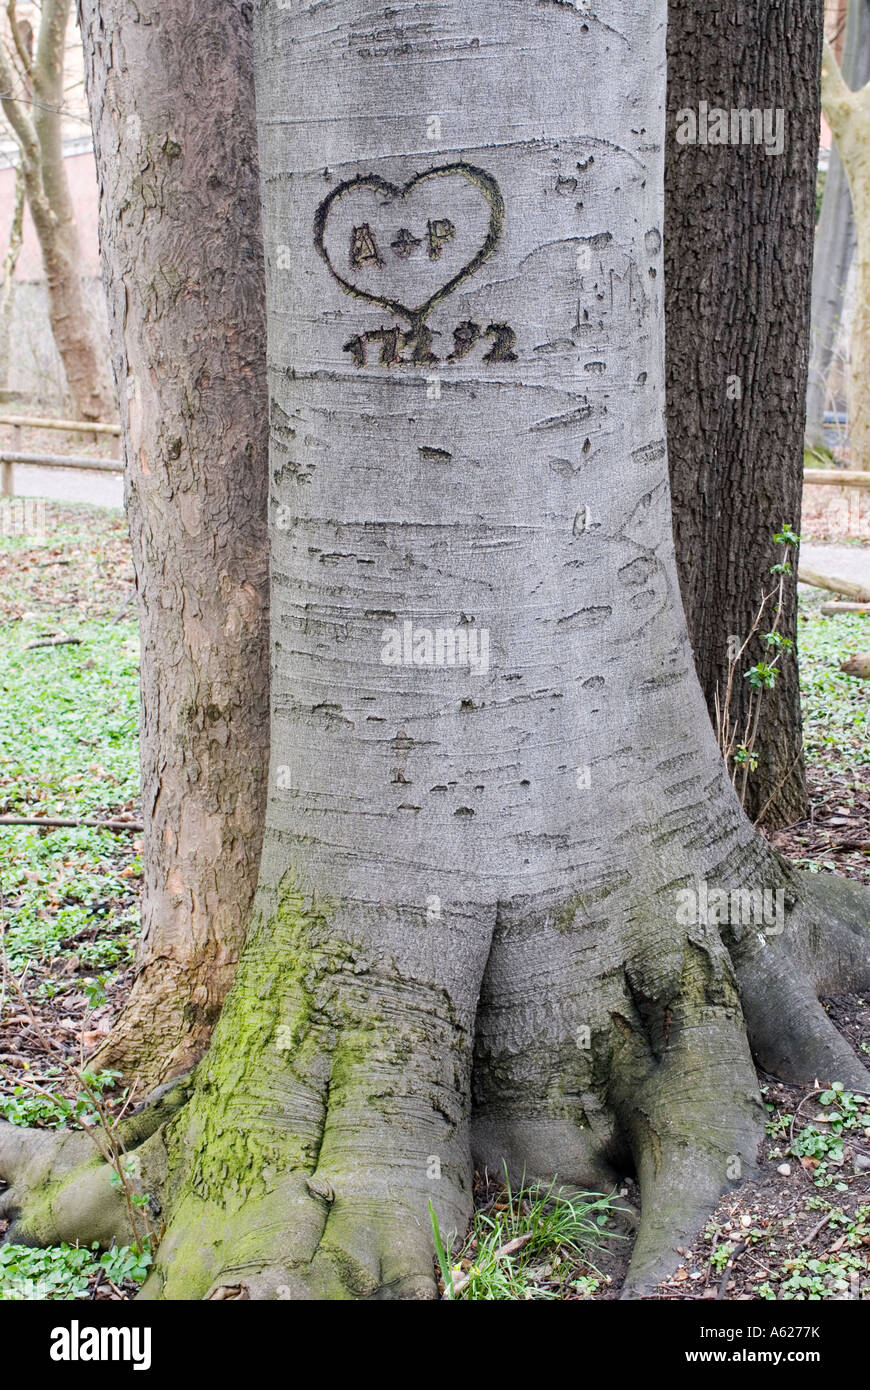 Common Beech Fagus sylvatica and cut heart initials and date 1992 carved written into Stock Photo